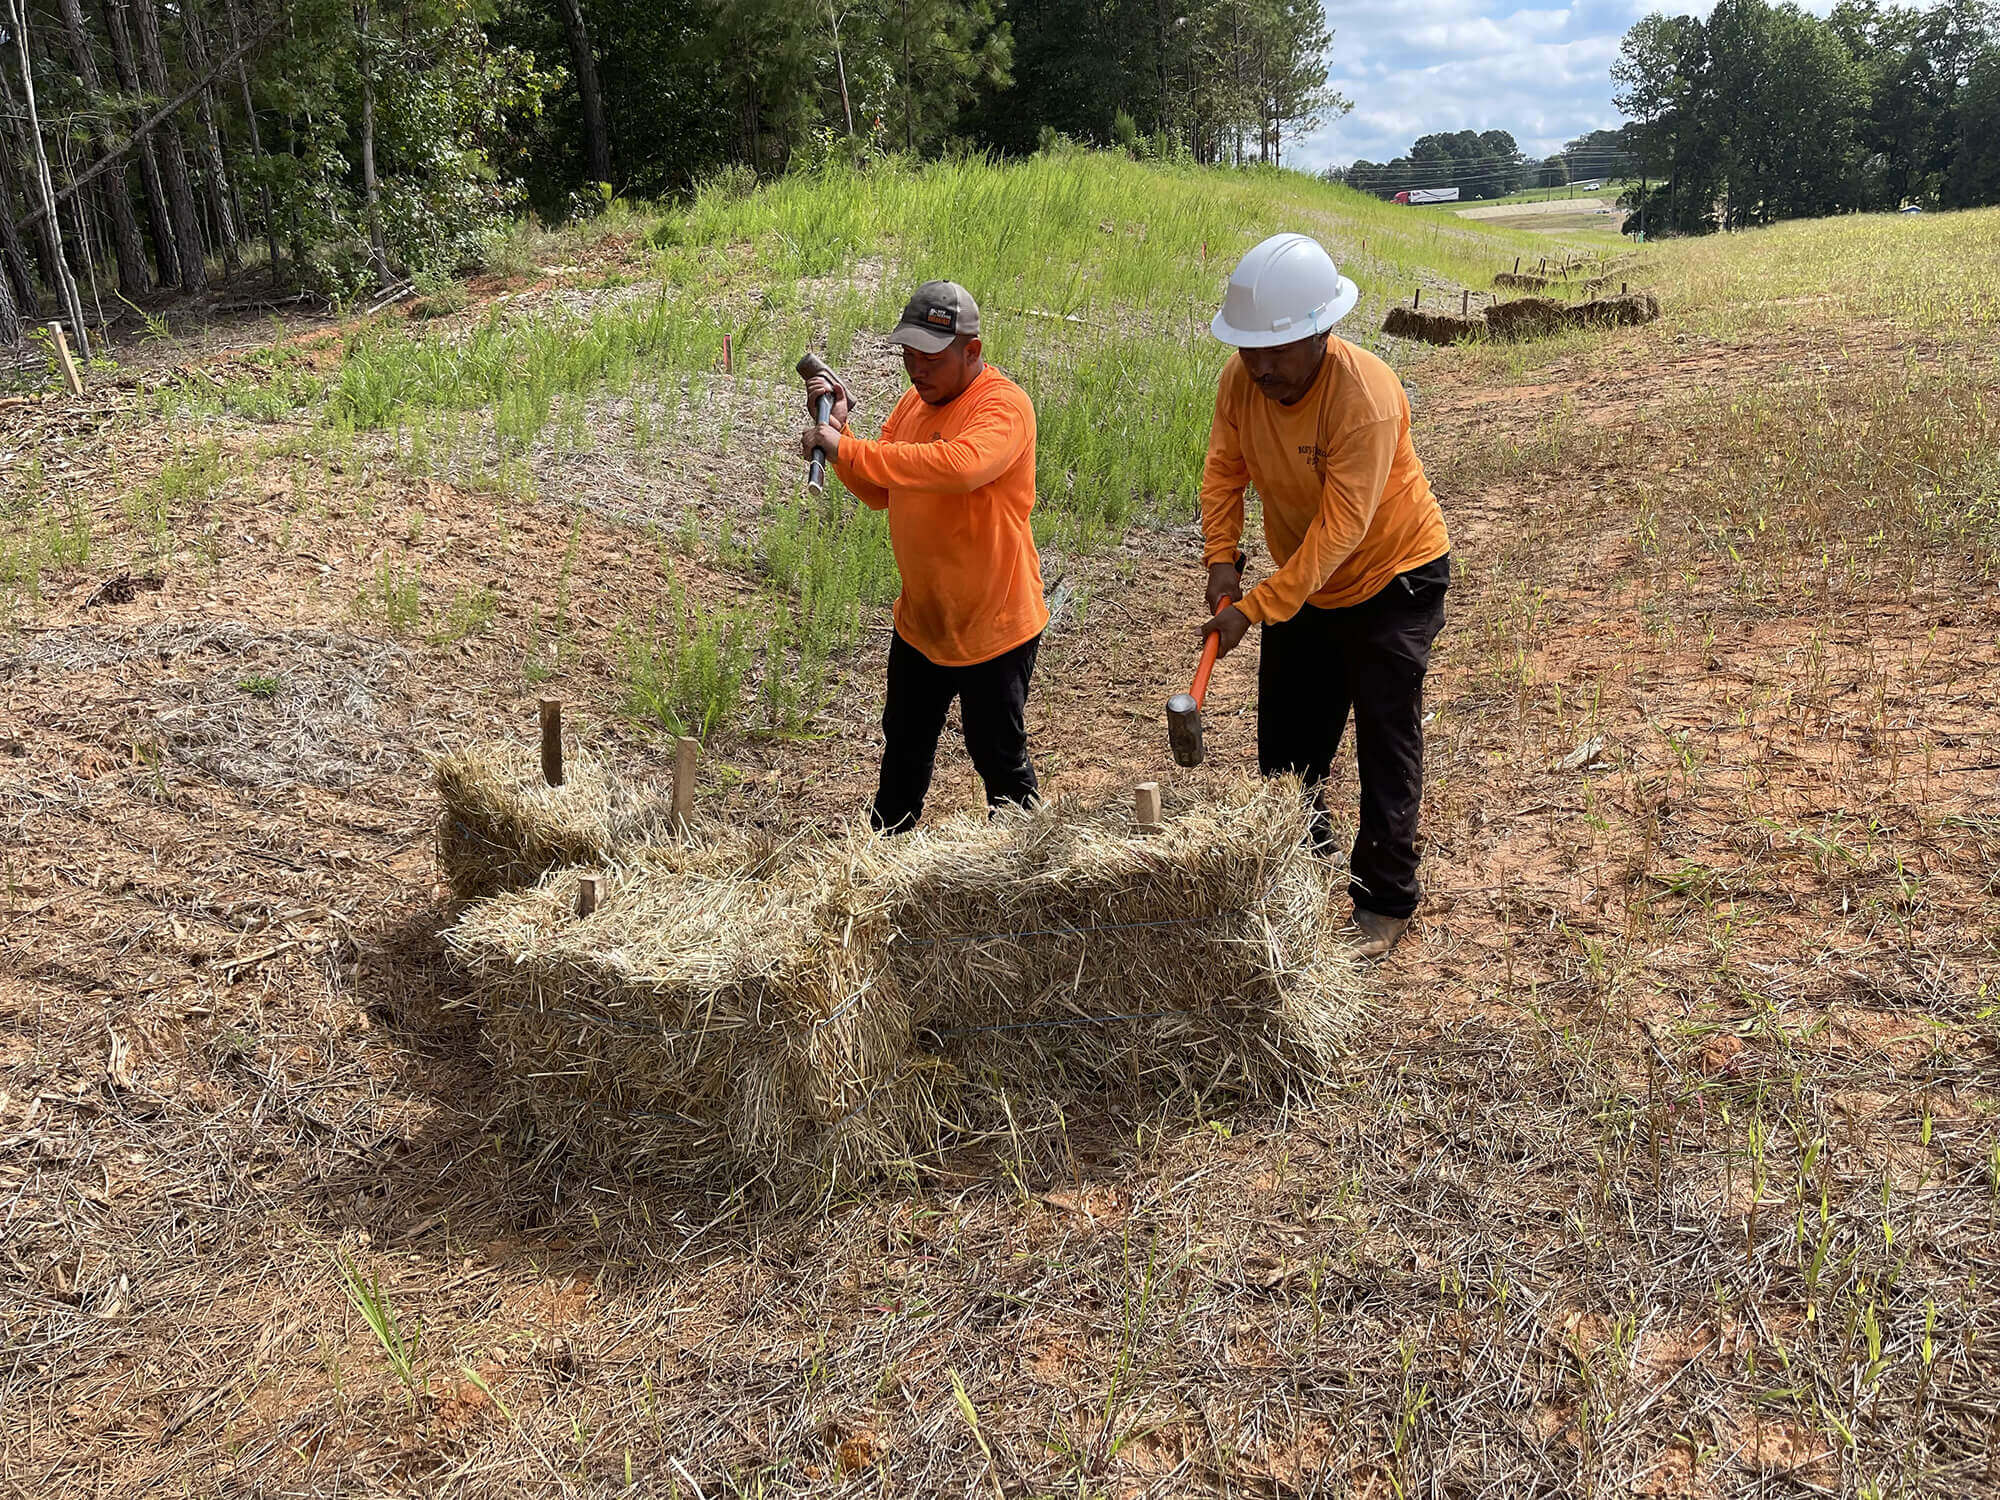 Hay being used to control erosion